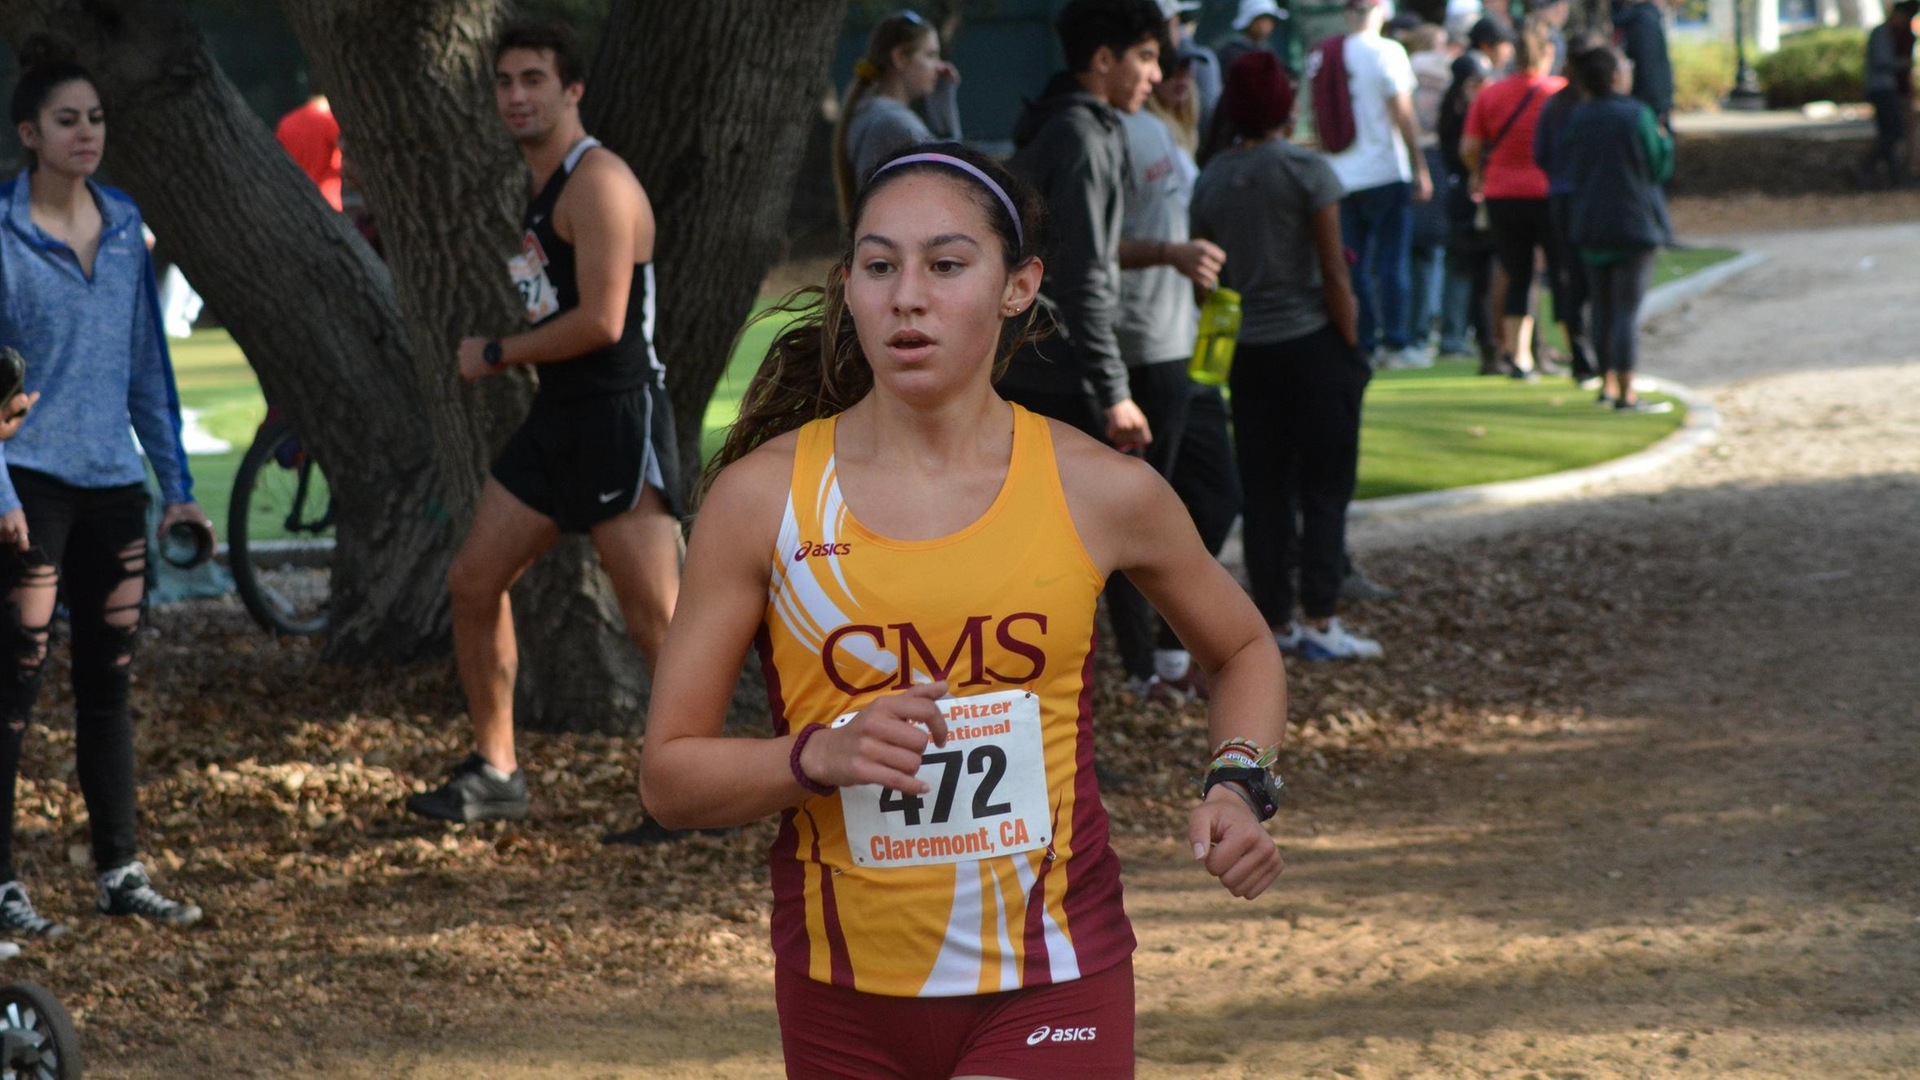 Natalie Bitetti took the individual title at the Redlands Invitational